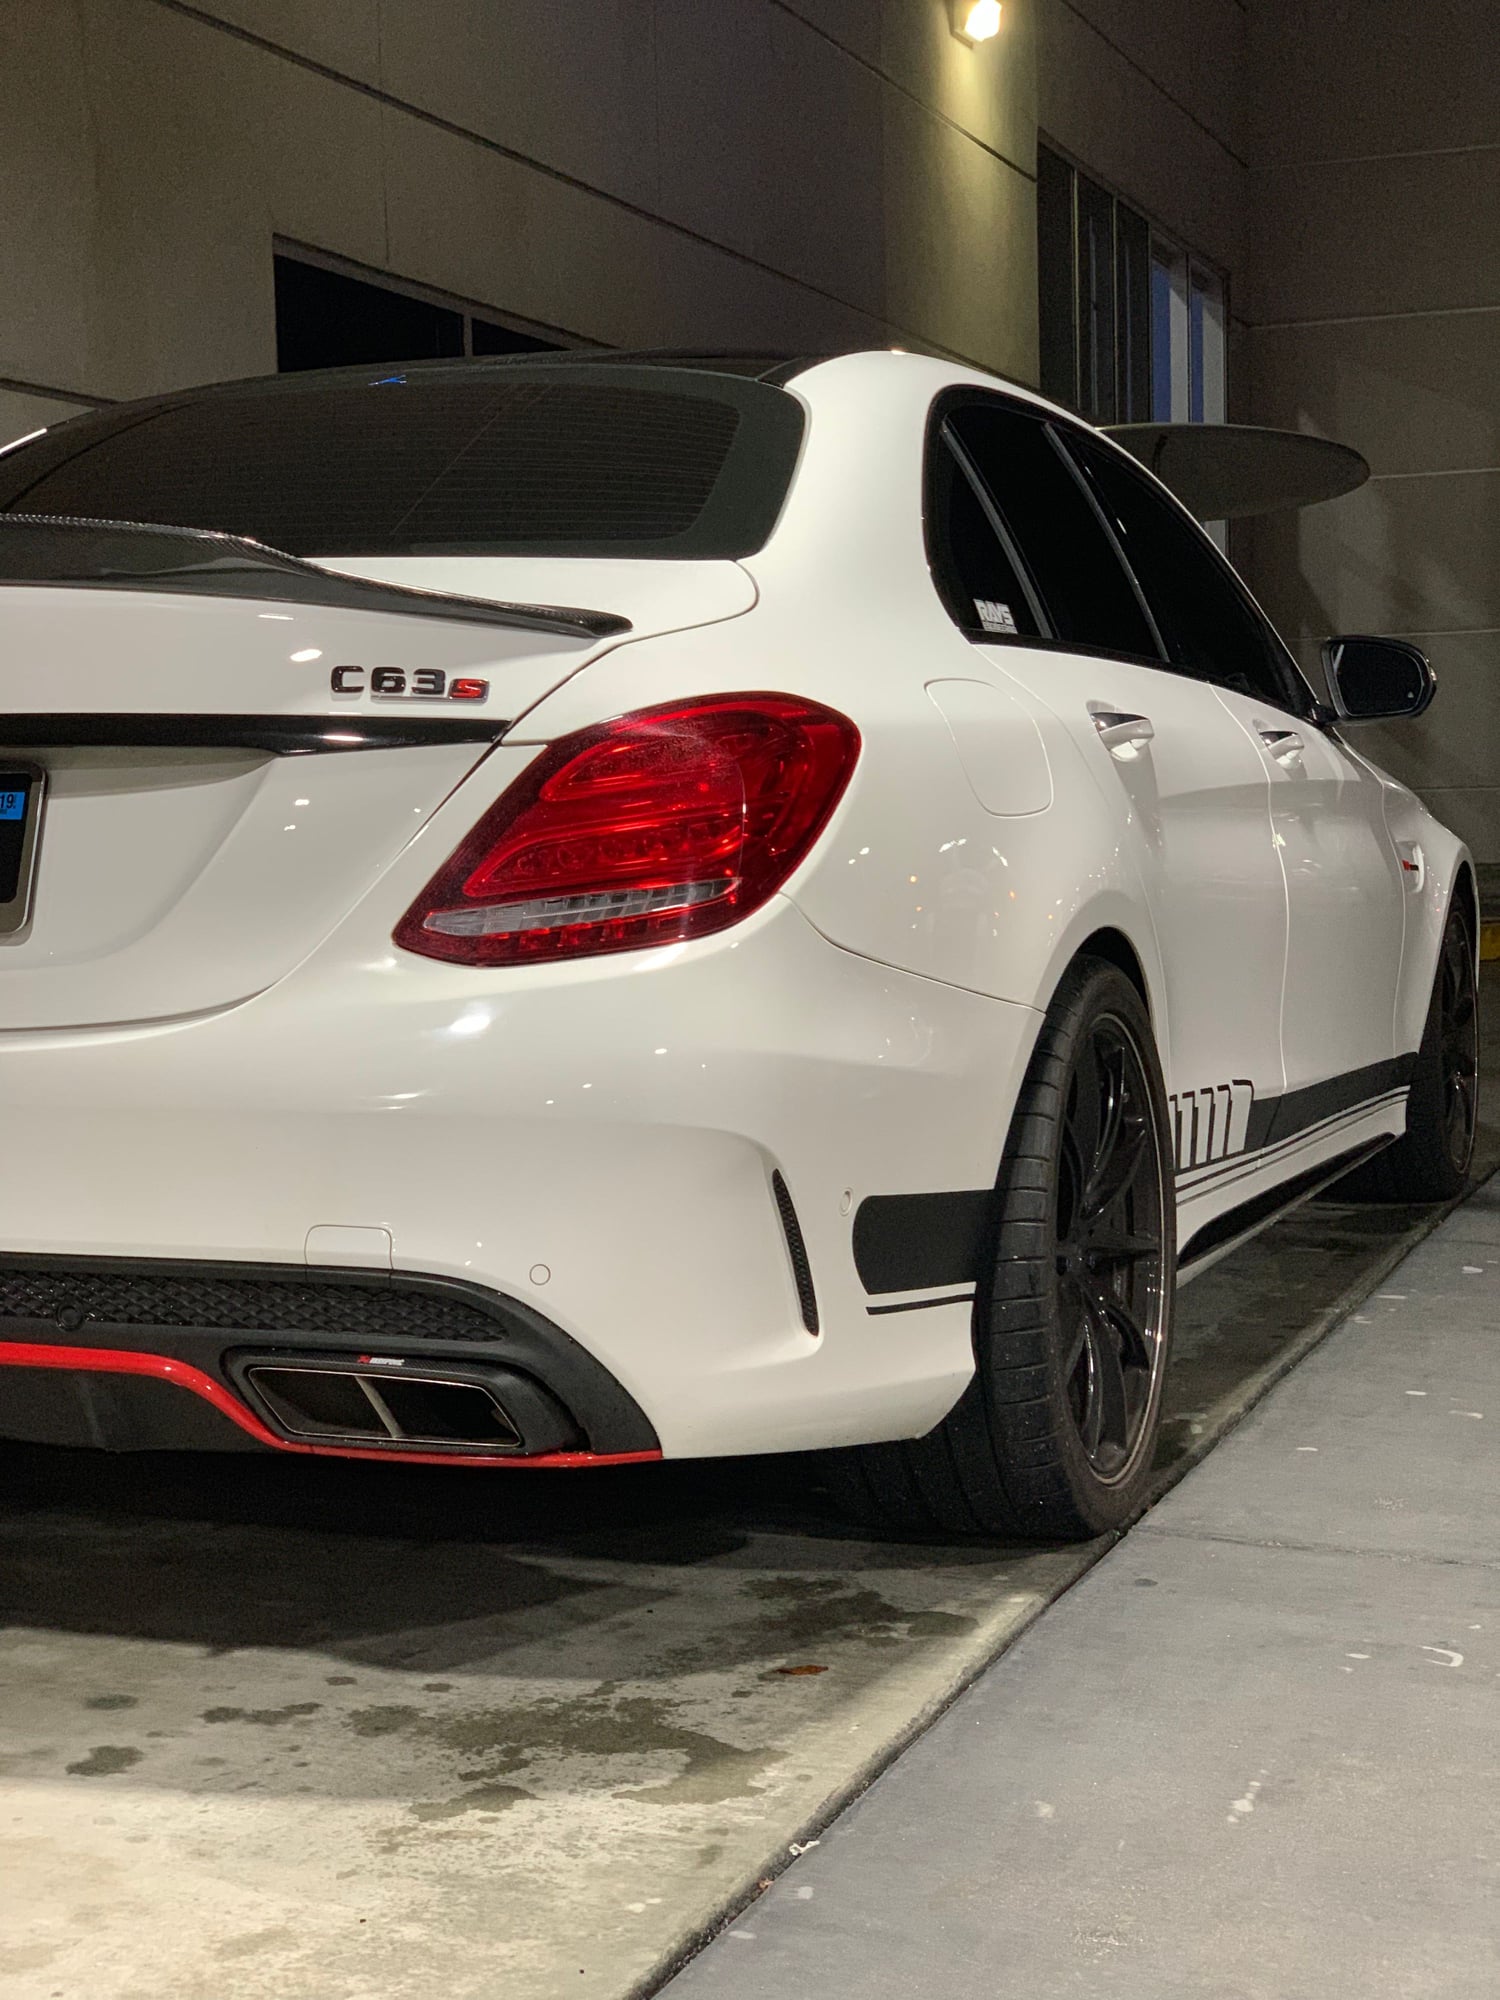 2016 Mercedes-Benz C63 AMG S - 2016 Mercedes-AMG C63S/Every Options/23400 miles/White on Red - Used - VIN 55WGFDS632S5S2563 - 23,400 Miles - 8 cyl - 2WD - Automatic - Sedan - White - Rancho Cucamonga, CA 91730, United States